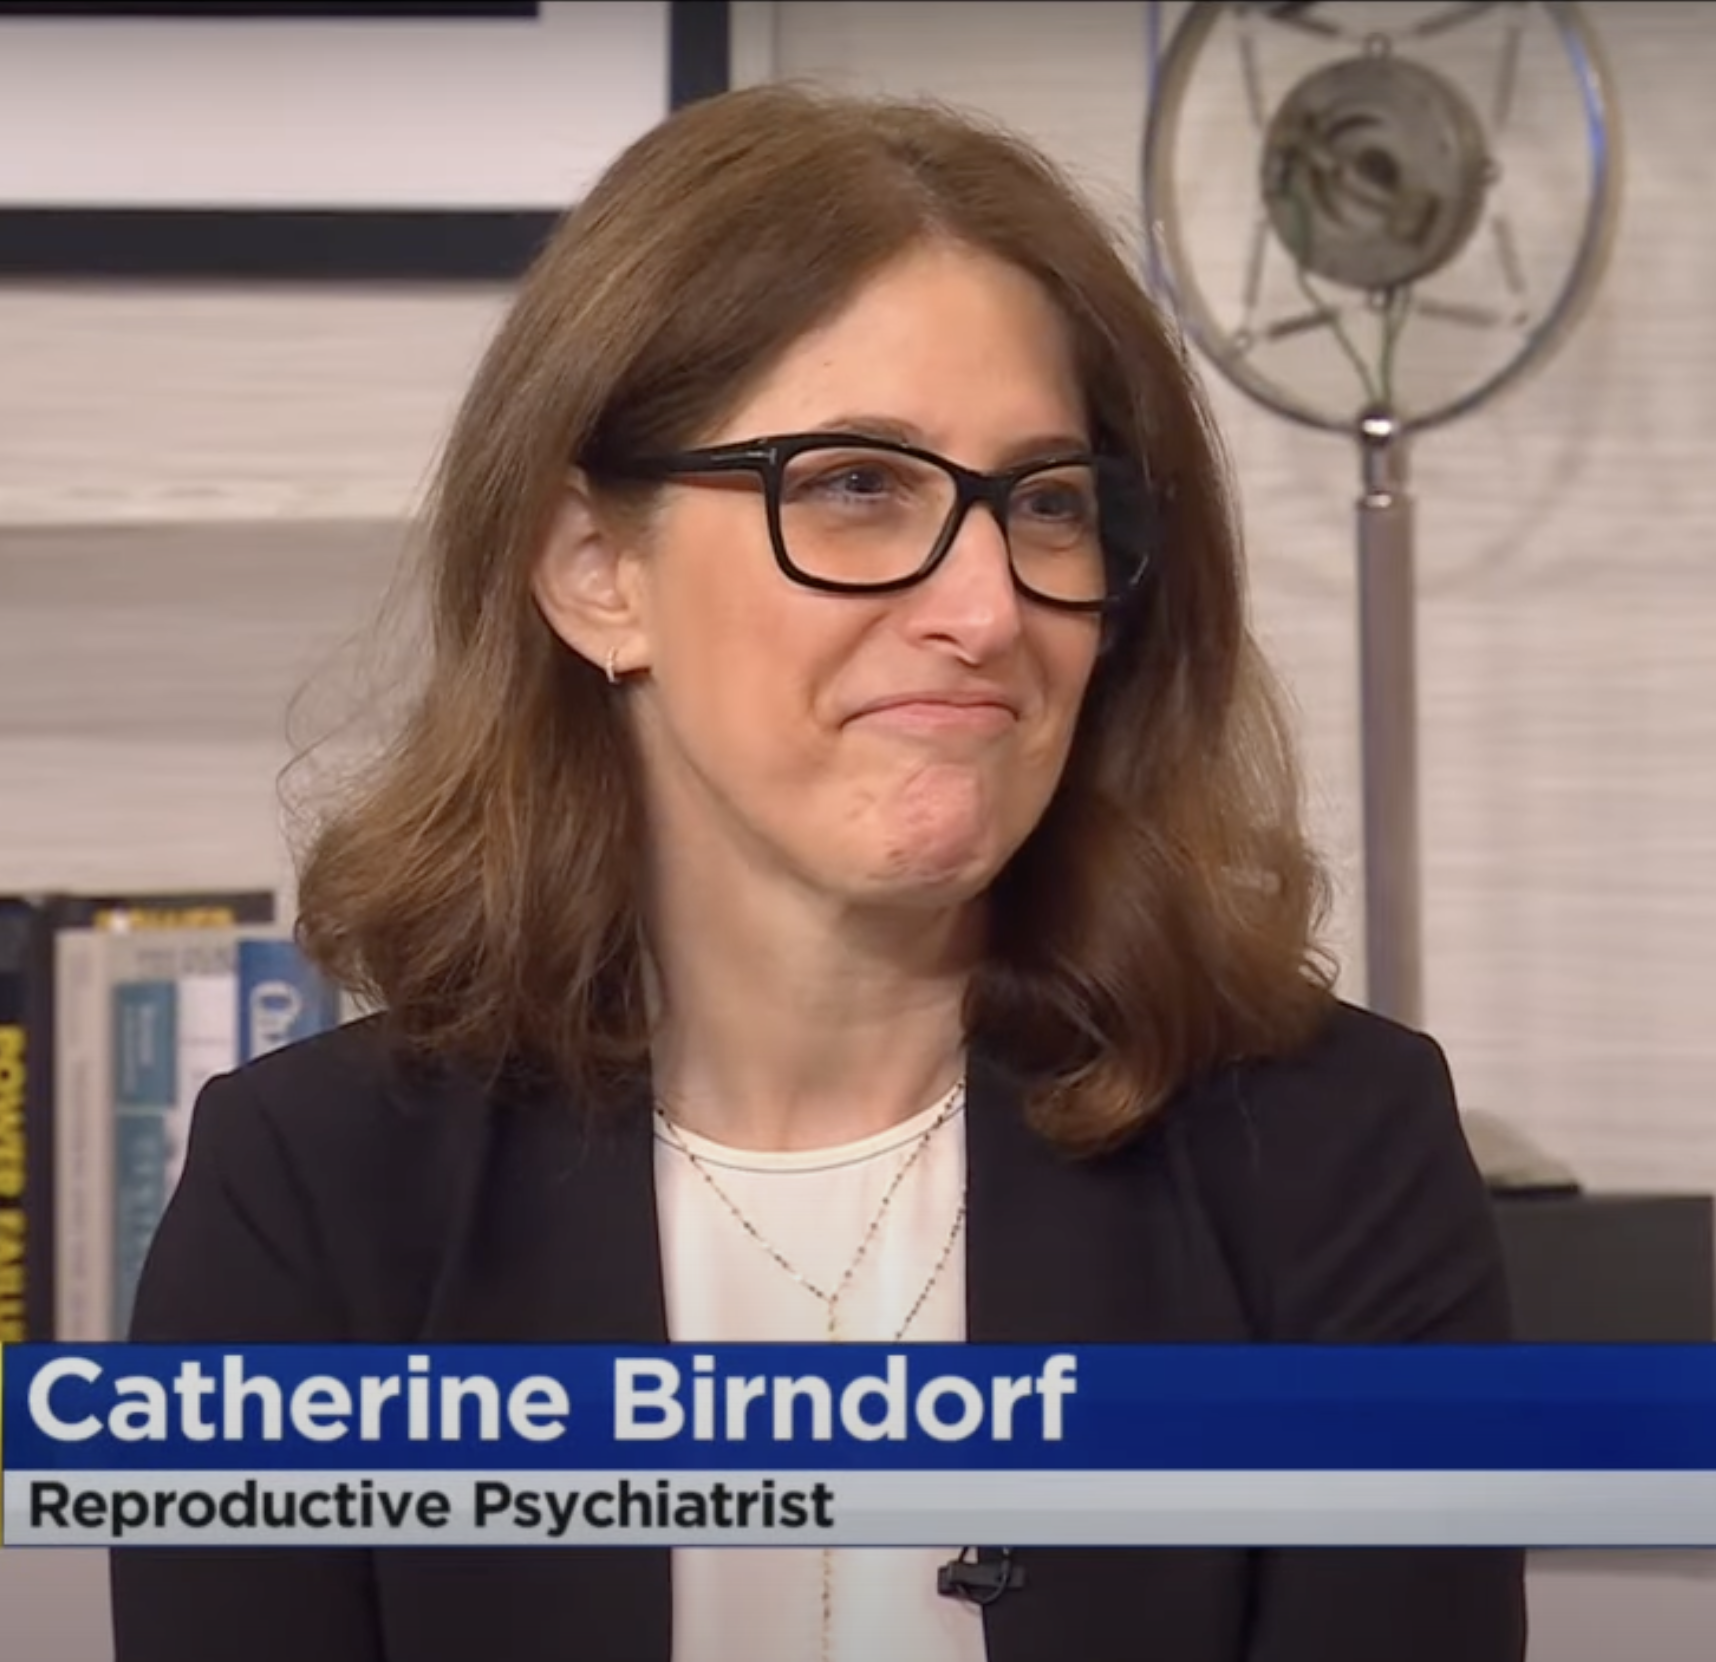 Dr. Catherine Birndorf on CBS New York Discussing Perinatal Mood and Anxiety Disorders (PMADs)